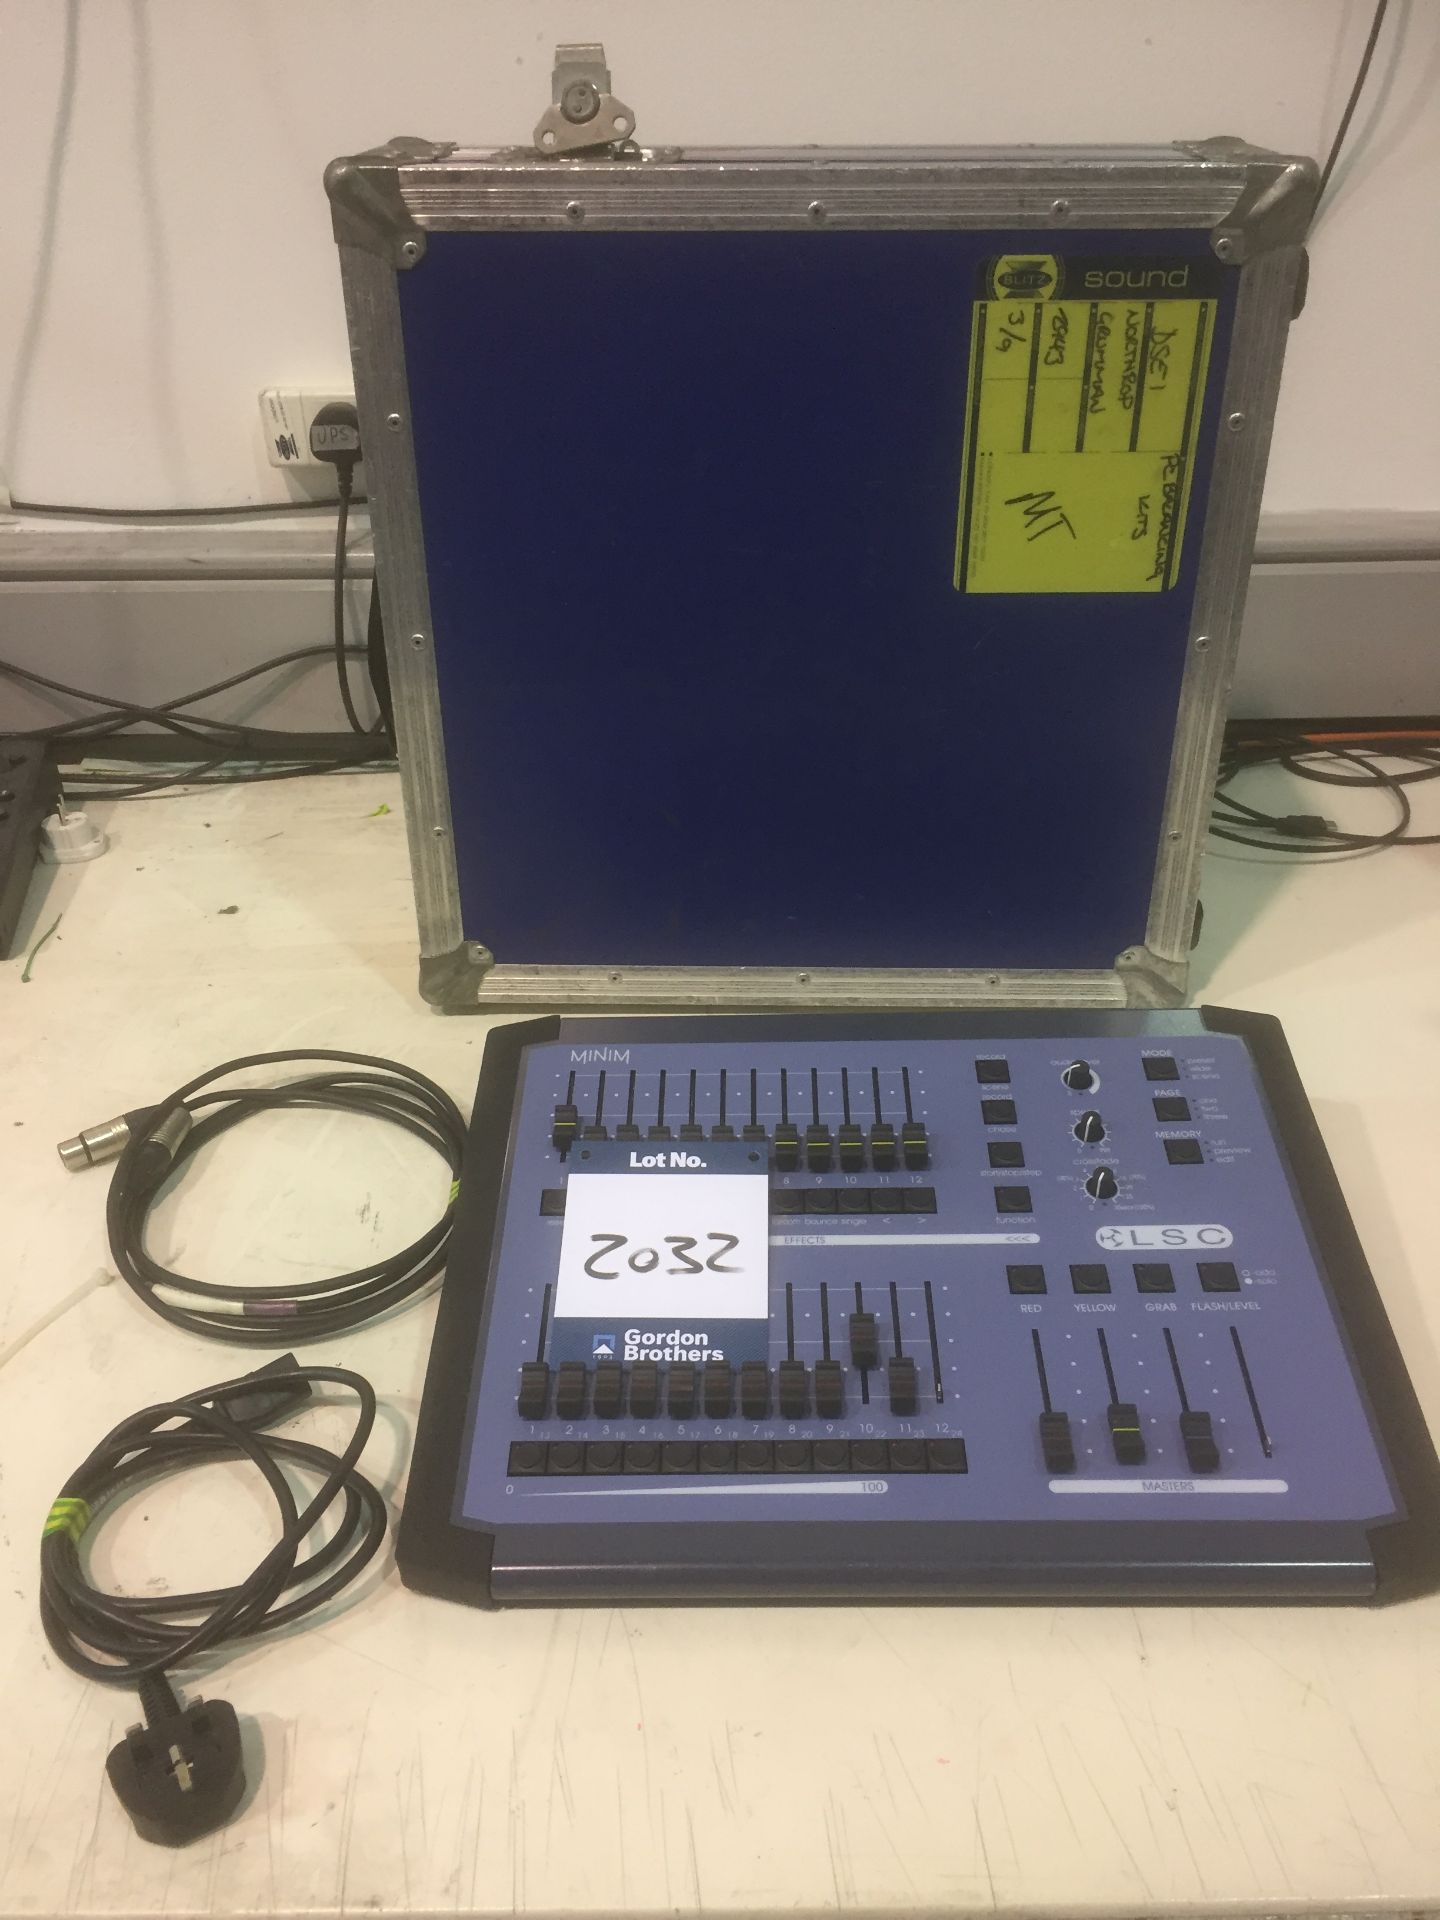 LSC Minim lighting console with 2 x 12 faders, S/N 56735, including lead/adaptors and flight case